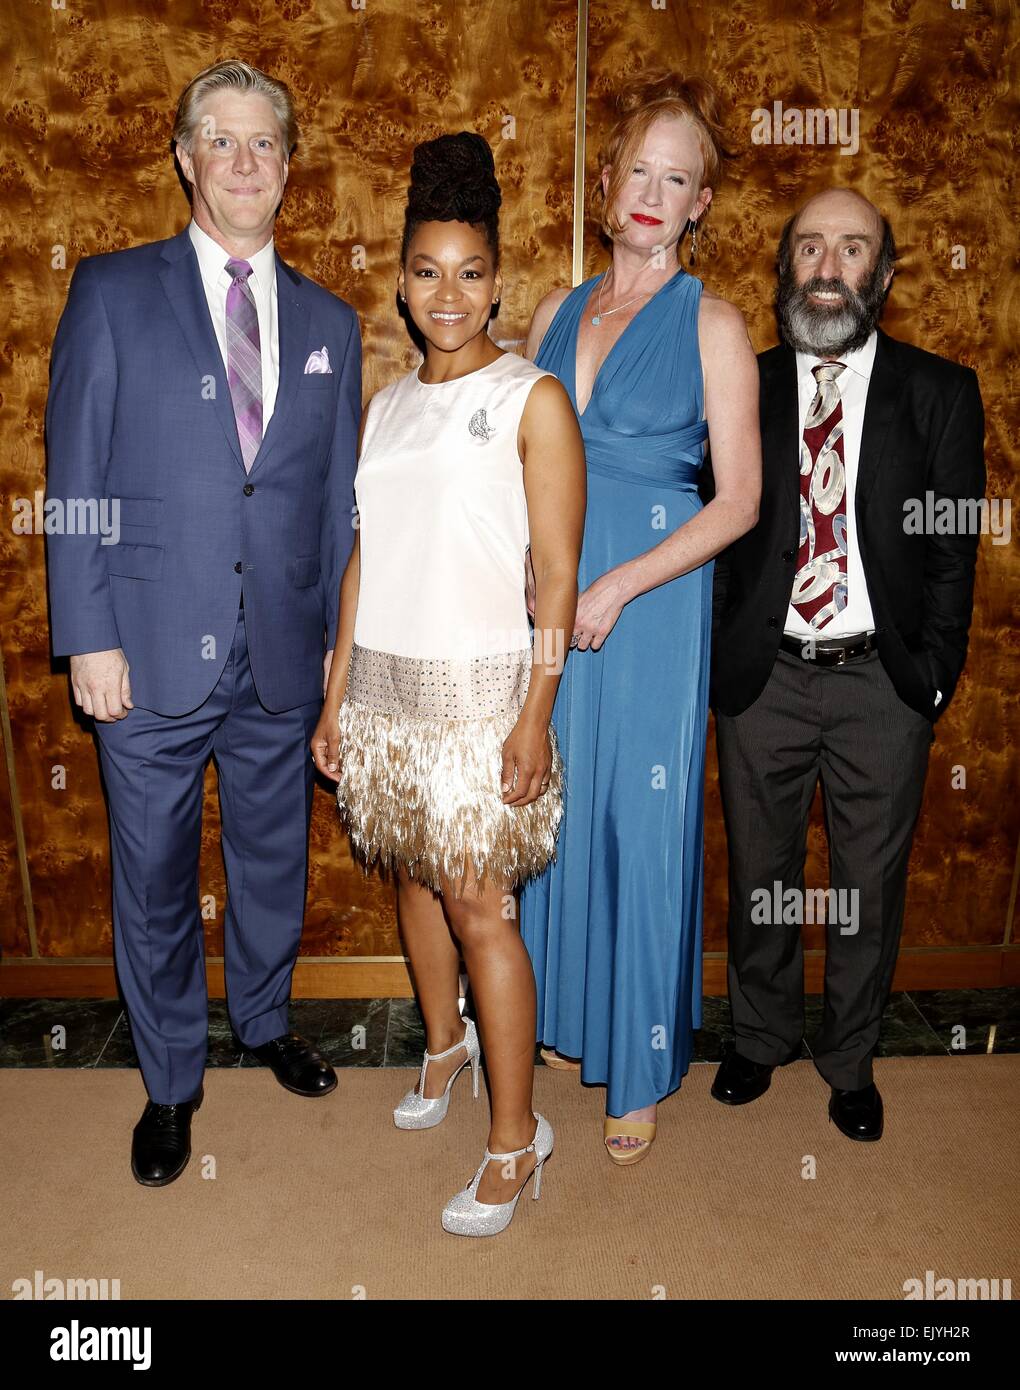 Opening night after party for 'You Can't Take It With You' held at Brasserie 8.5 restaurant - Arrivals Featuring: Karl Kenzler,Crystal A. Dickinson,Johanna Day,Patrick Kerr Where: New York, New York, United States When: 28 Sep 2014 Stock Photo